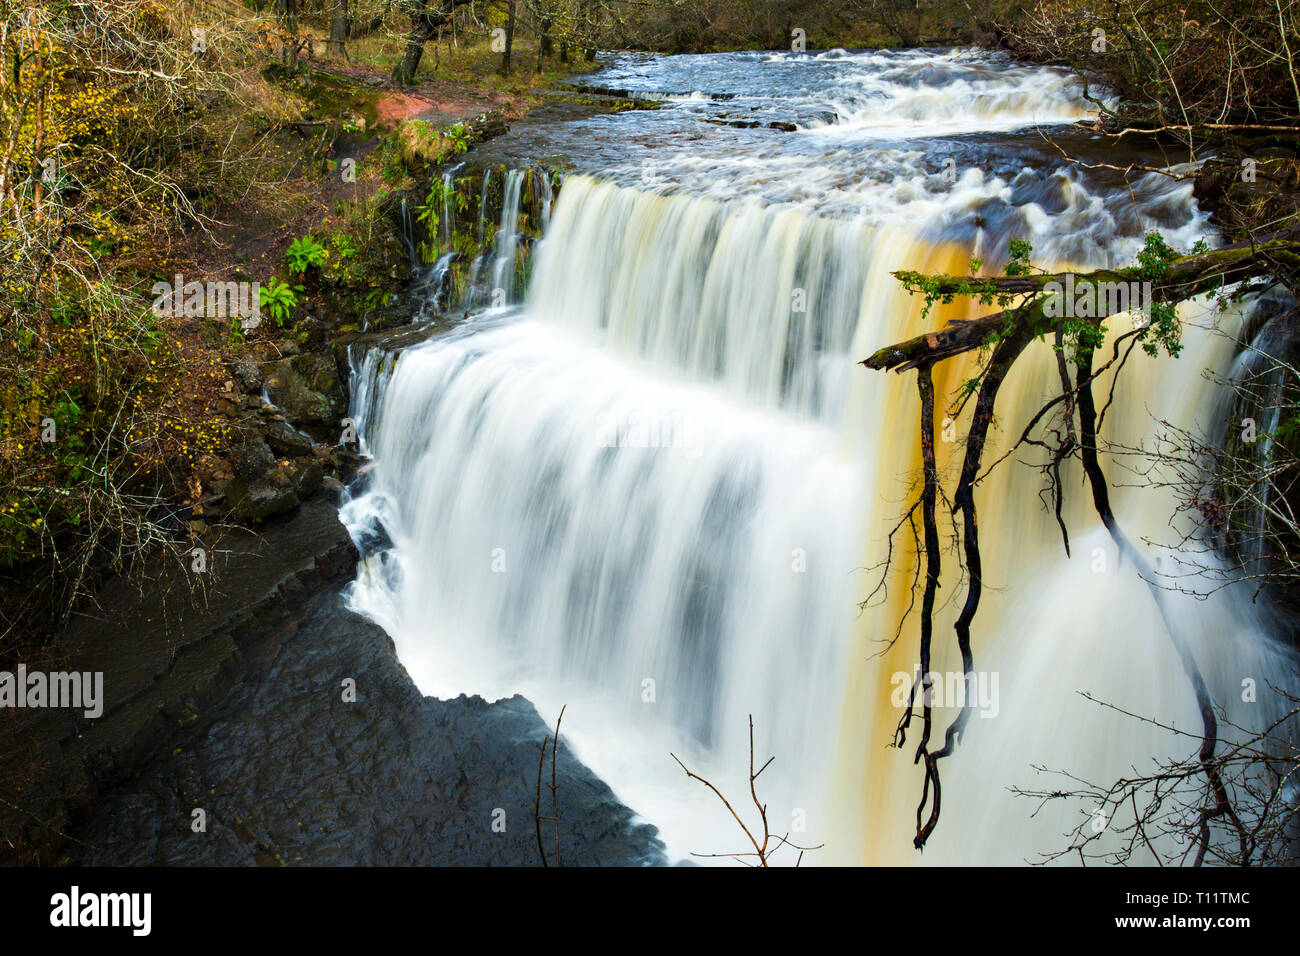 Great Britain, Brecon Beacons NP, Ystradfellte. View at a popular waterfall walk in The Fall. Stock Photo